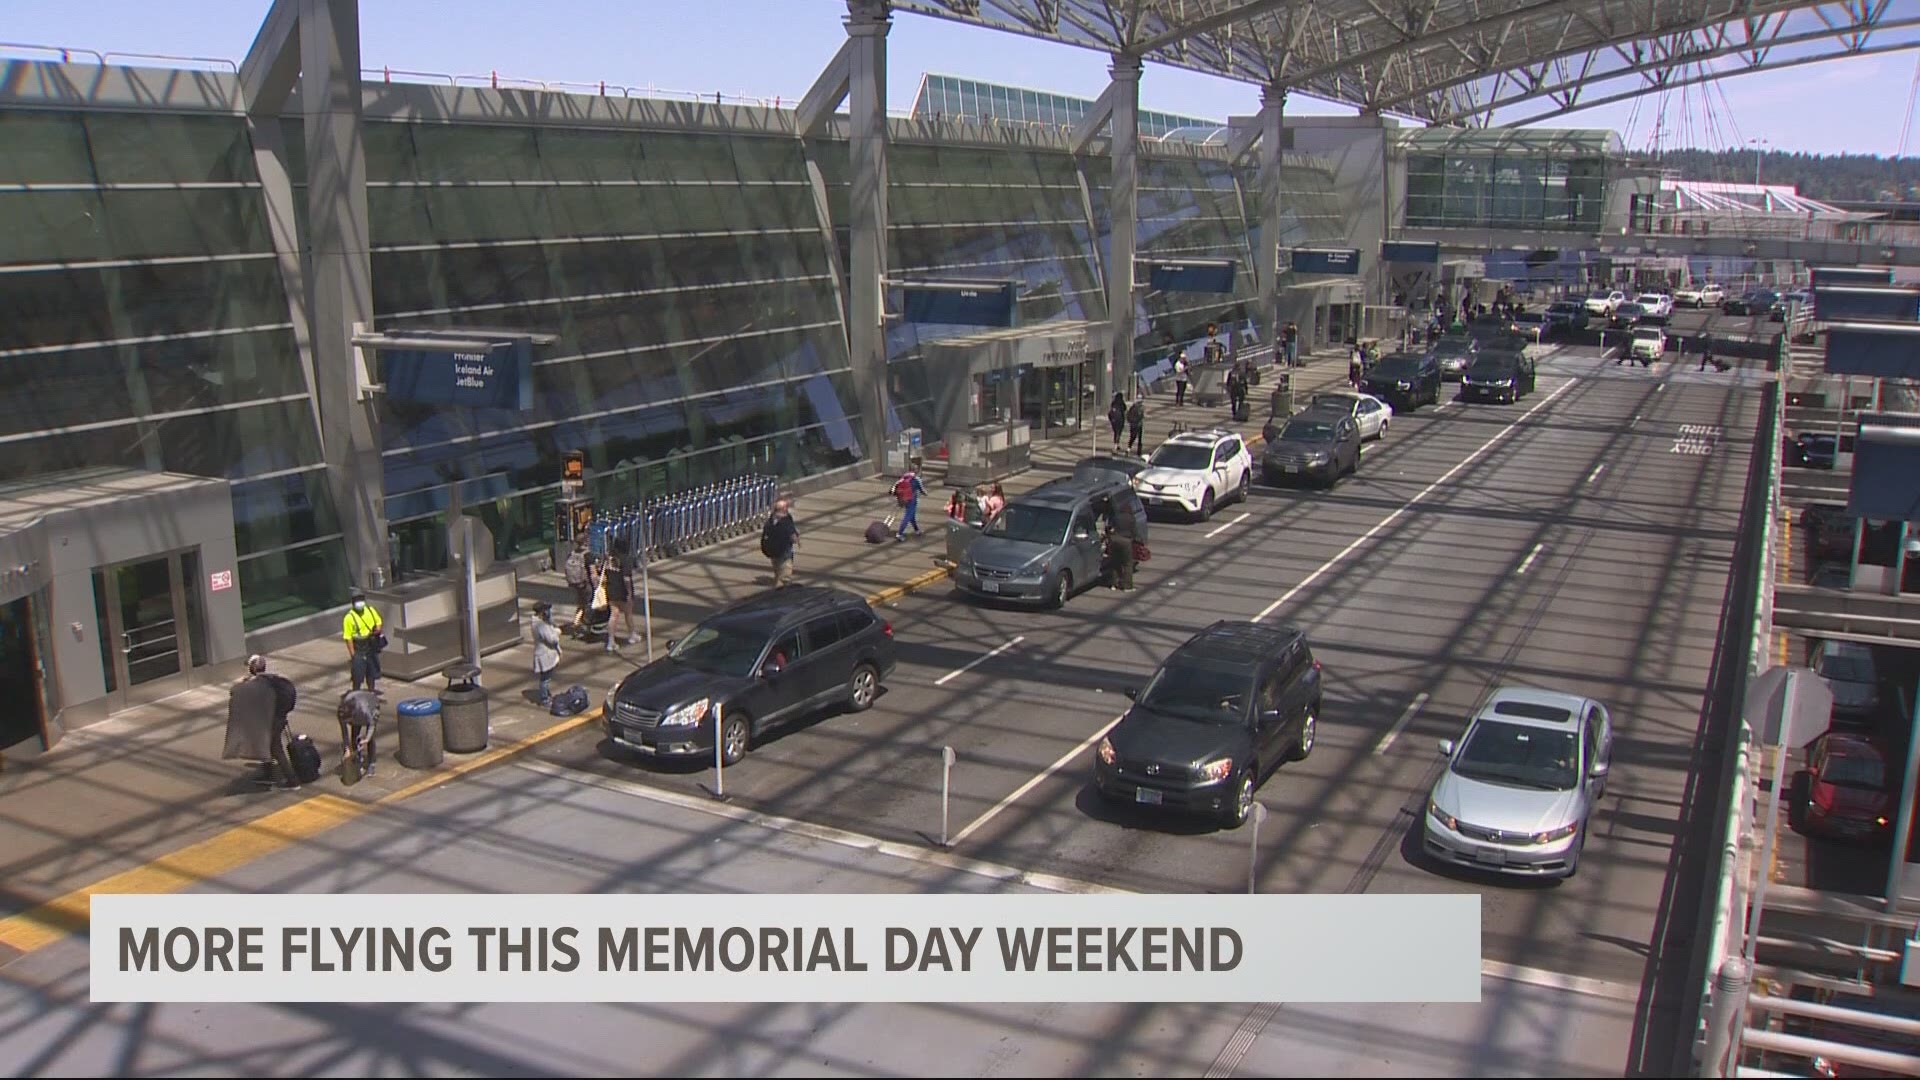 Memorial Day weekend at Portland International Airport looks a lot different this year compared to 2020, when the COVID-19 pandemic had just started.